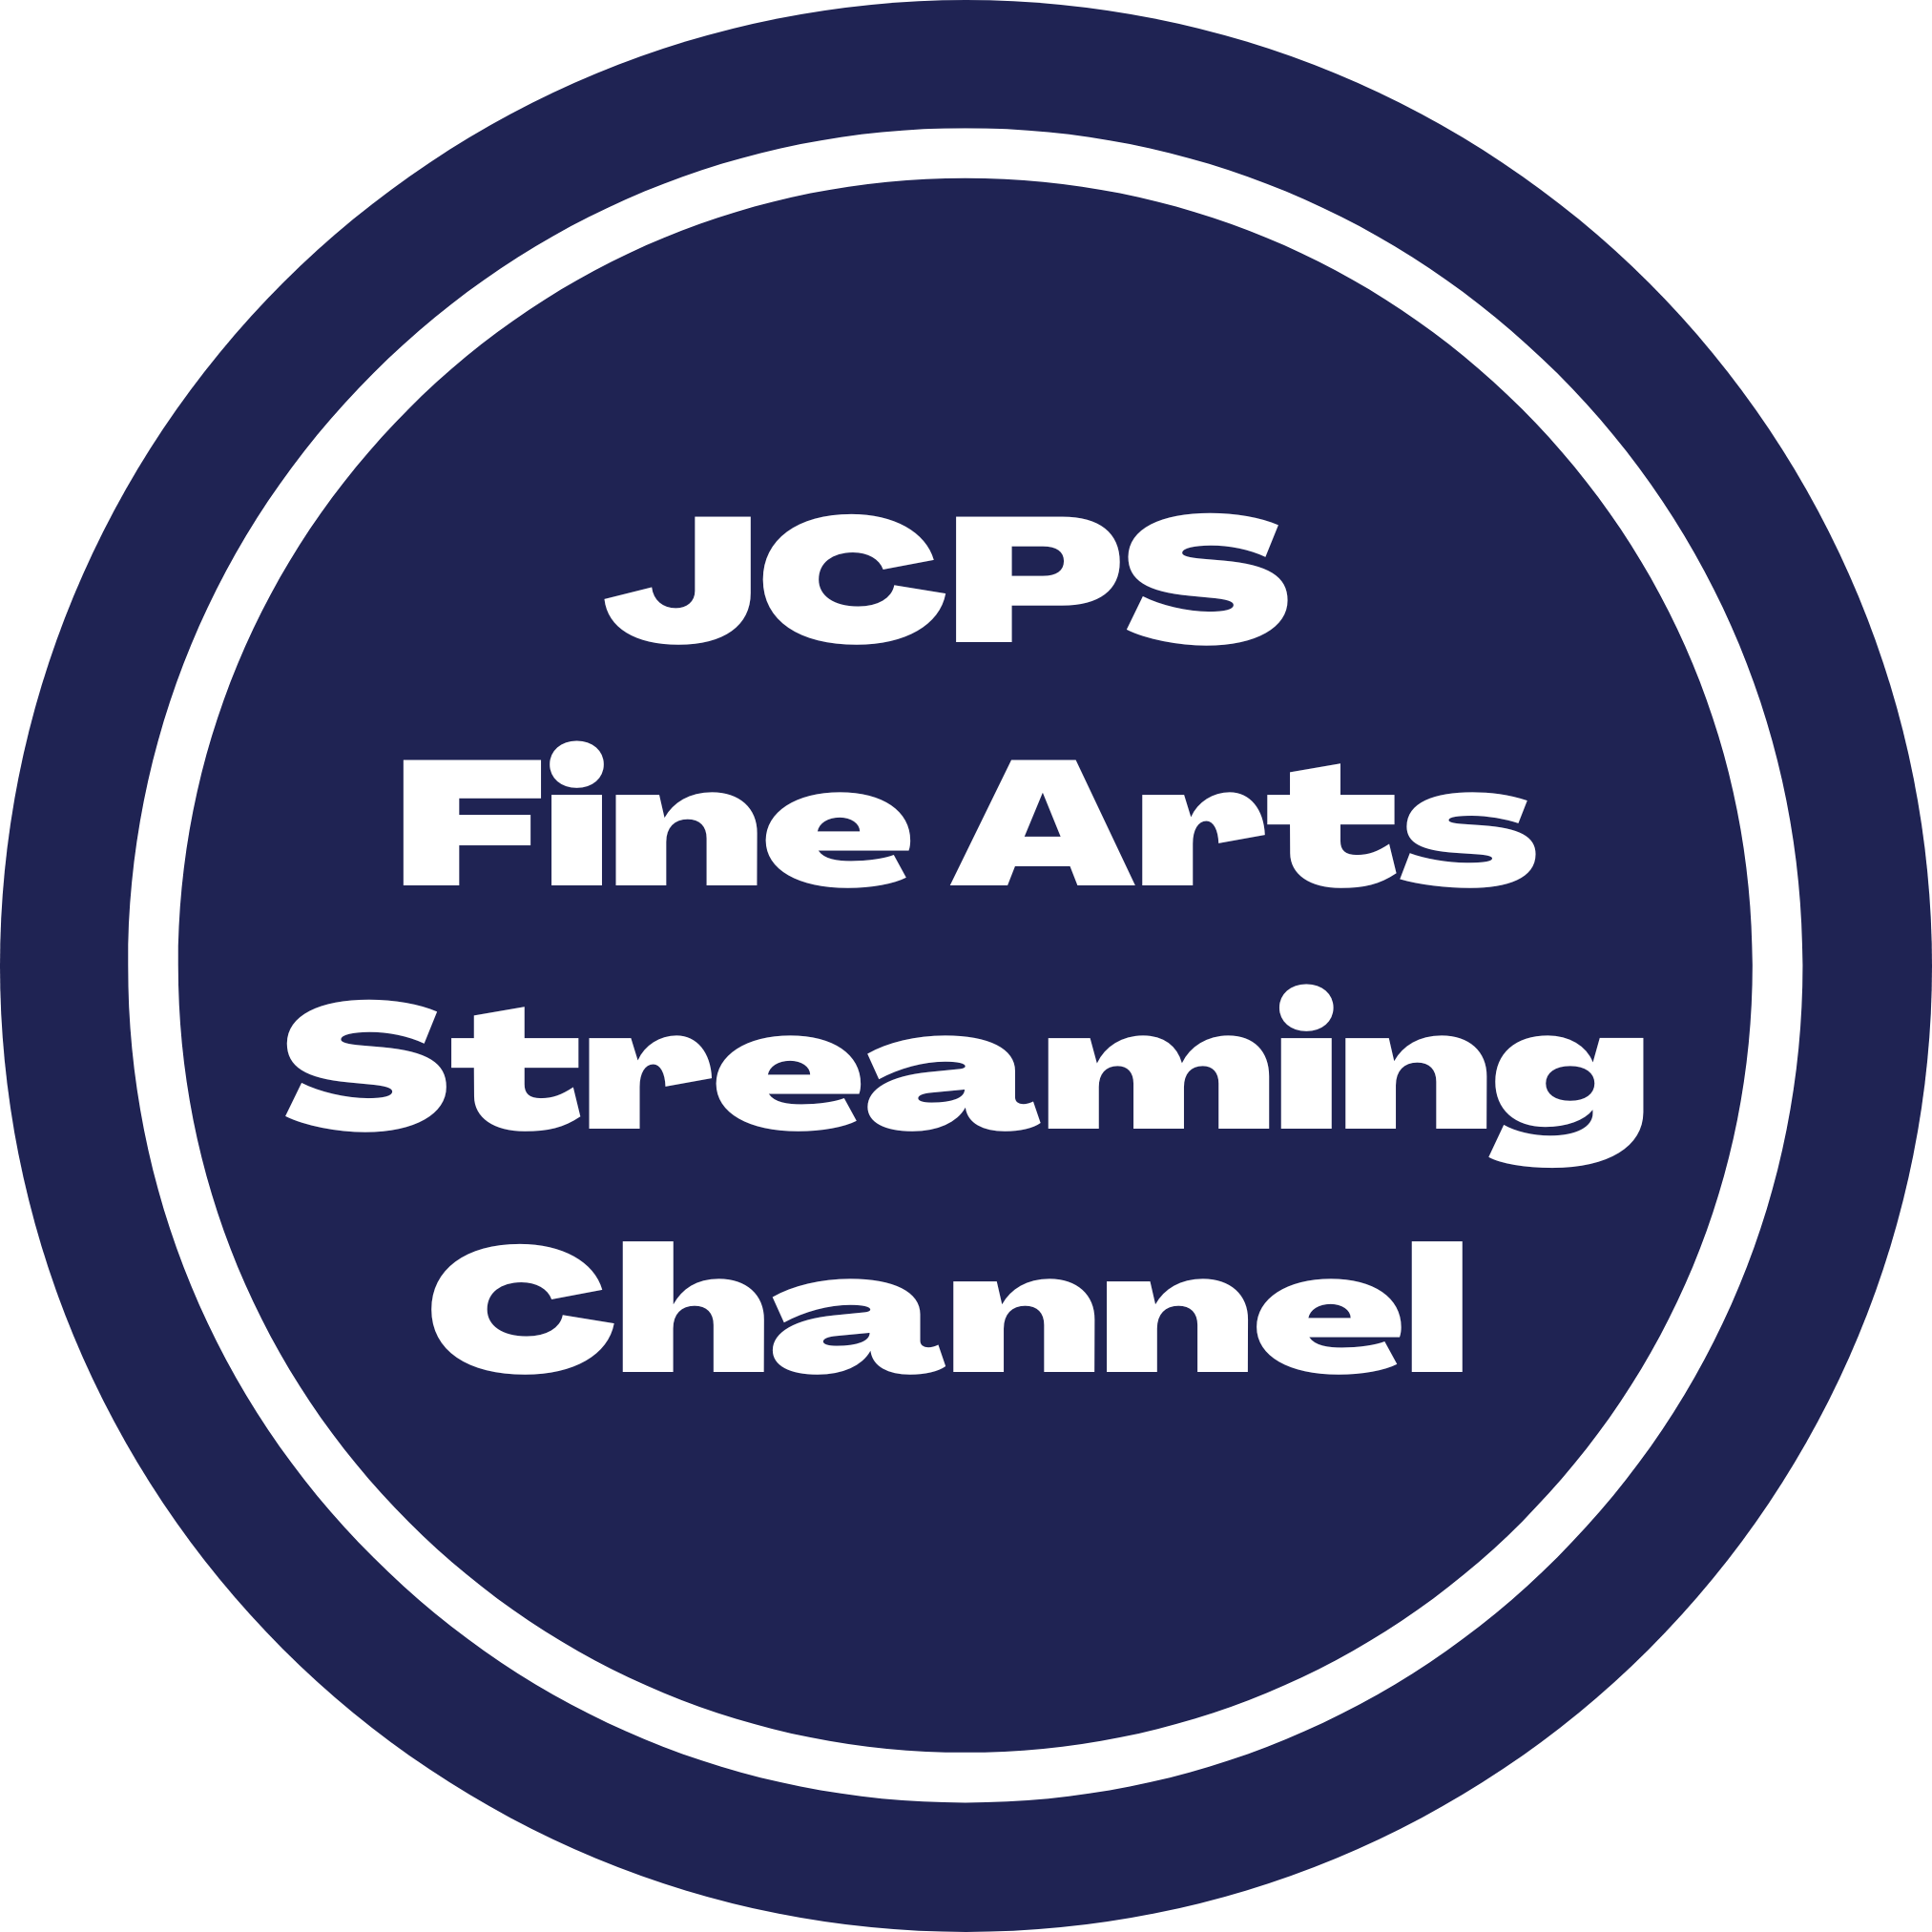 JCPS Fine Arts Streaming Channel